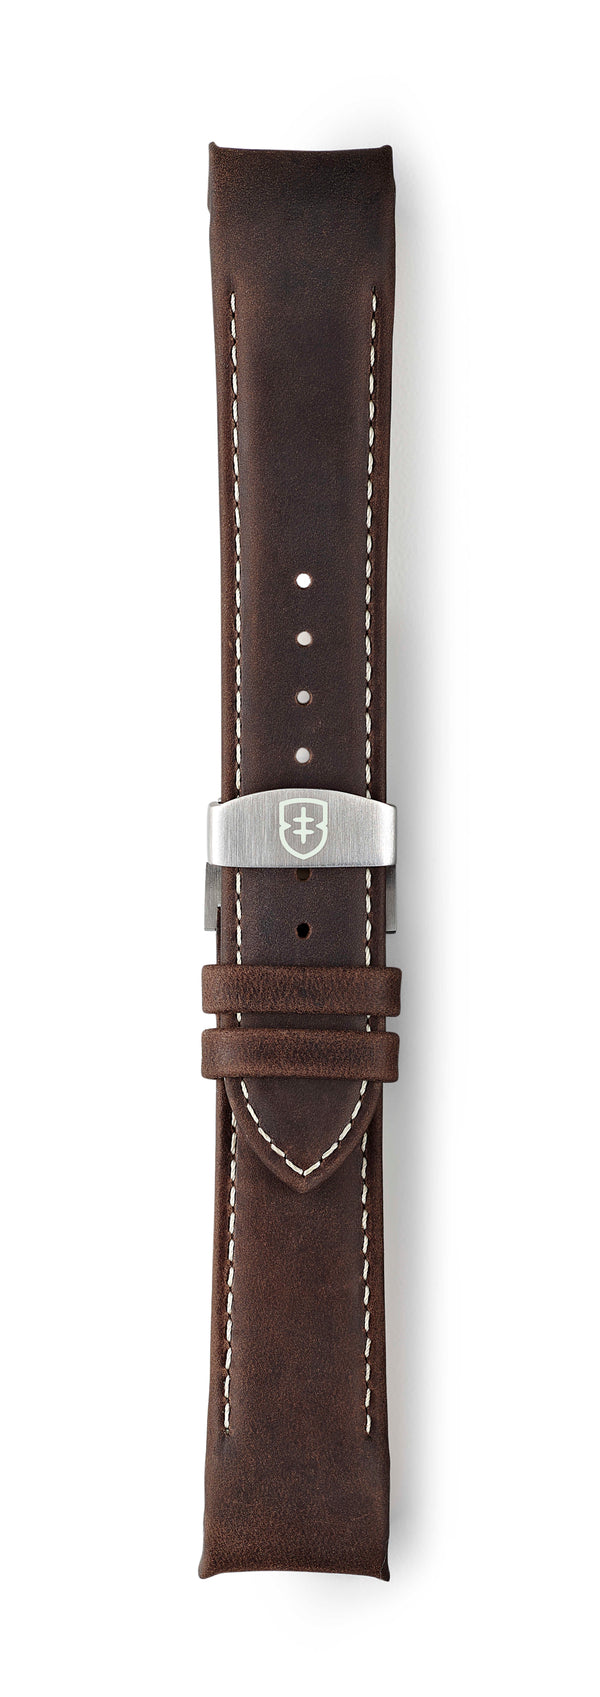 STR-L23: Dark Brown Waxed Leather with Contrast Stitch,